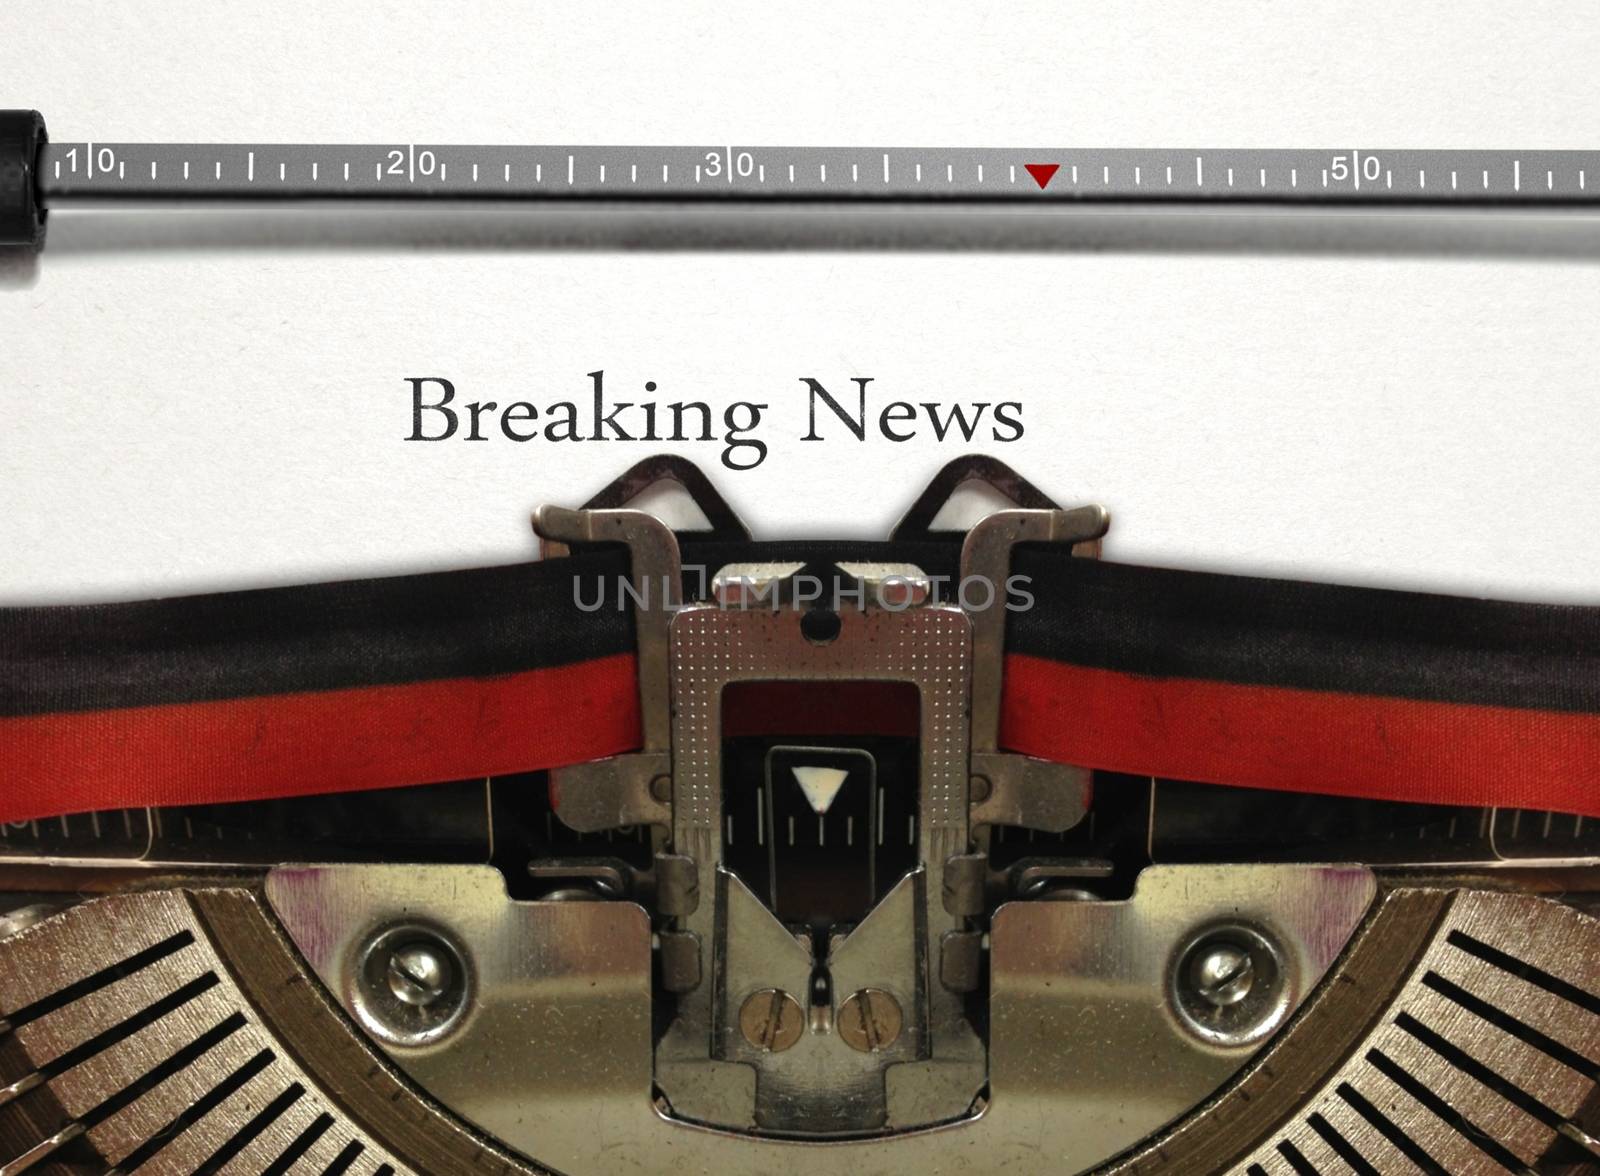 Typewriter with Breaking News by razihusin